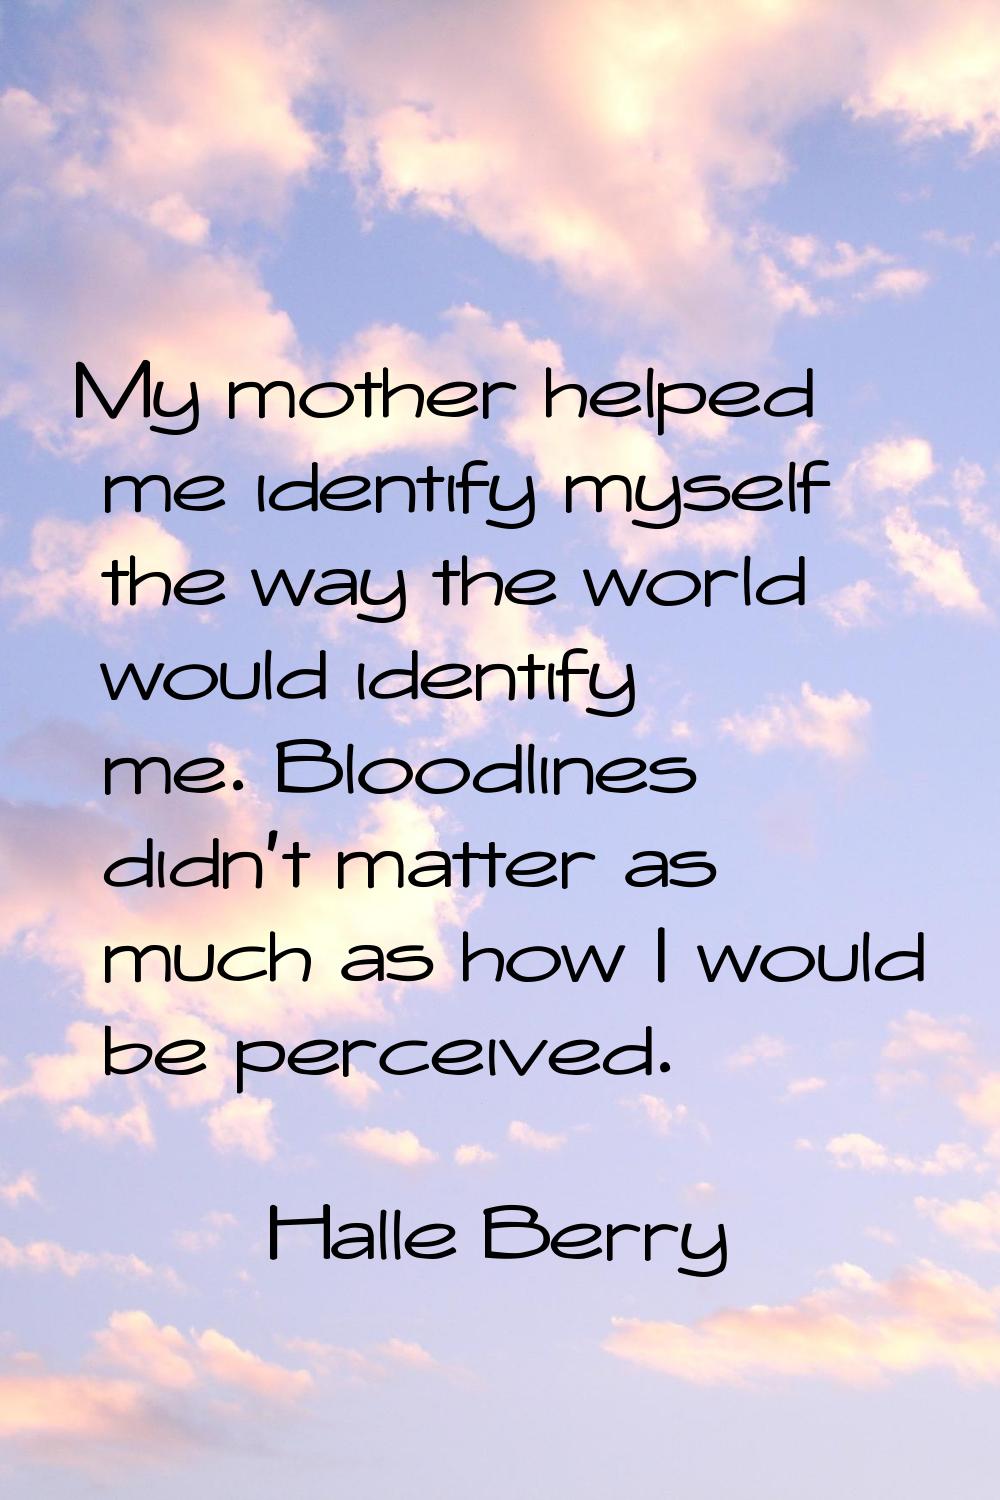 My mother helped me identify myself the way the world would identify me. Bloodlines didn't matter a